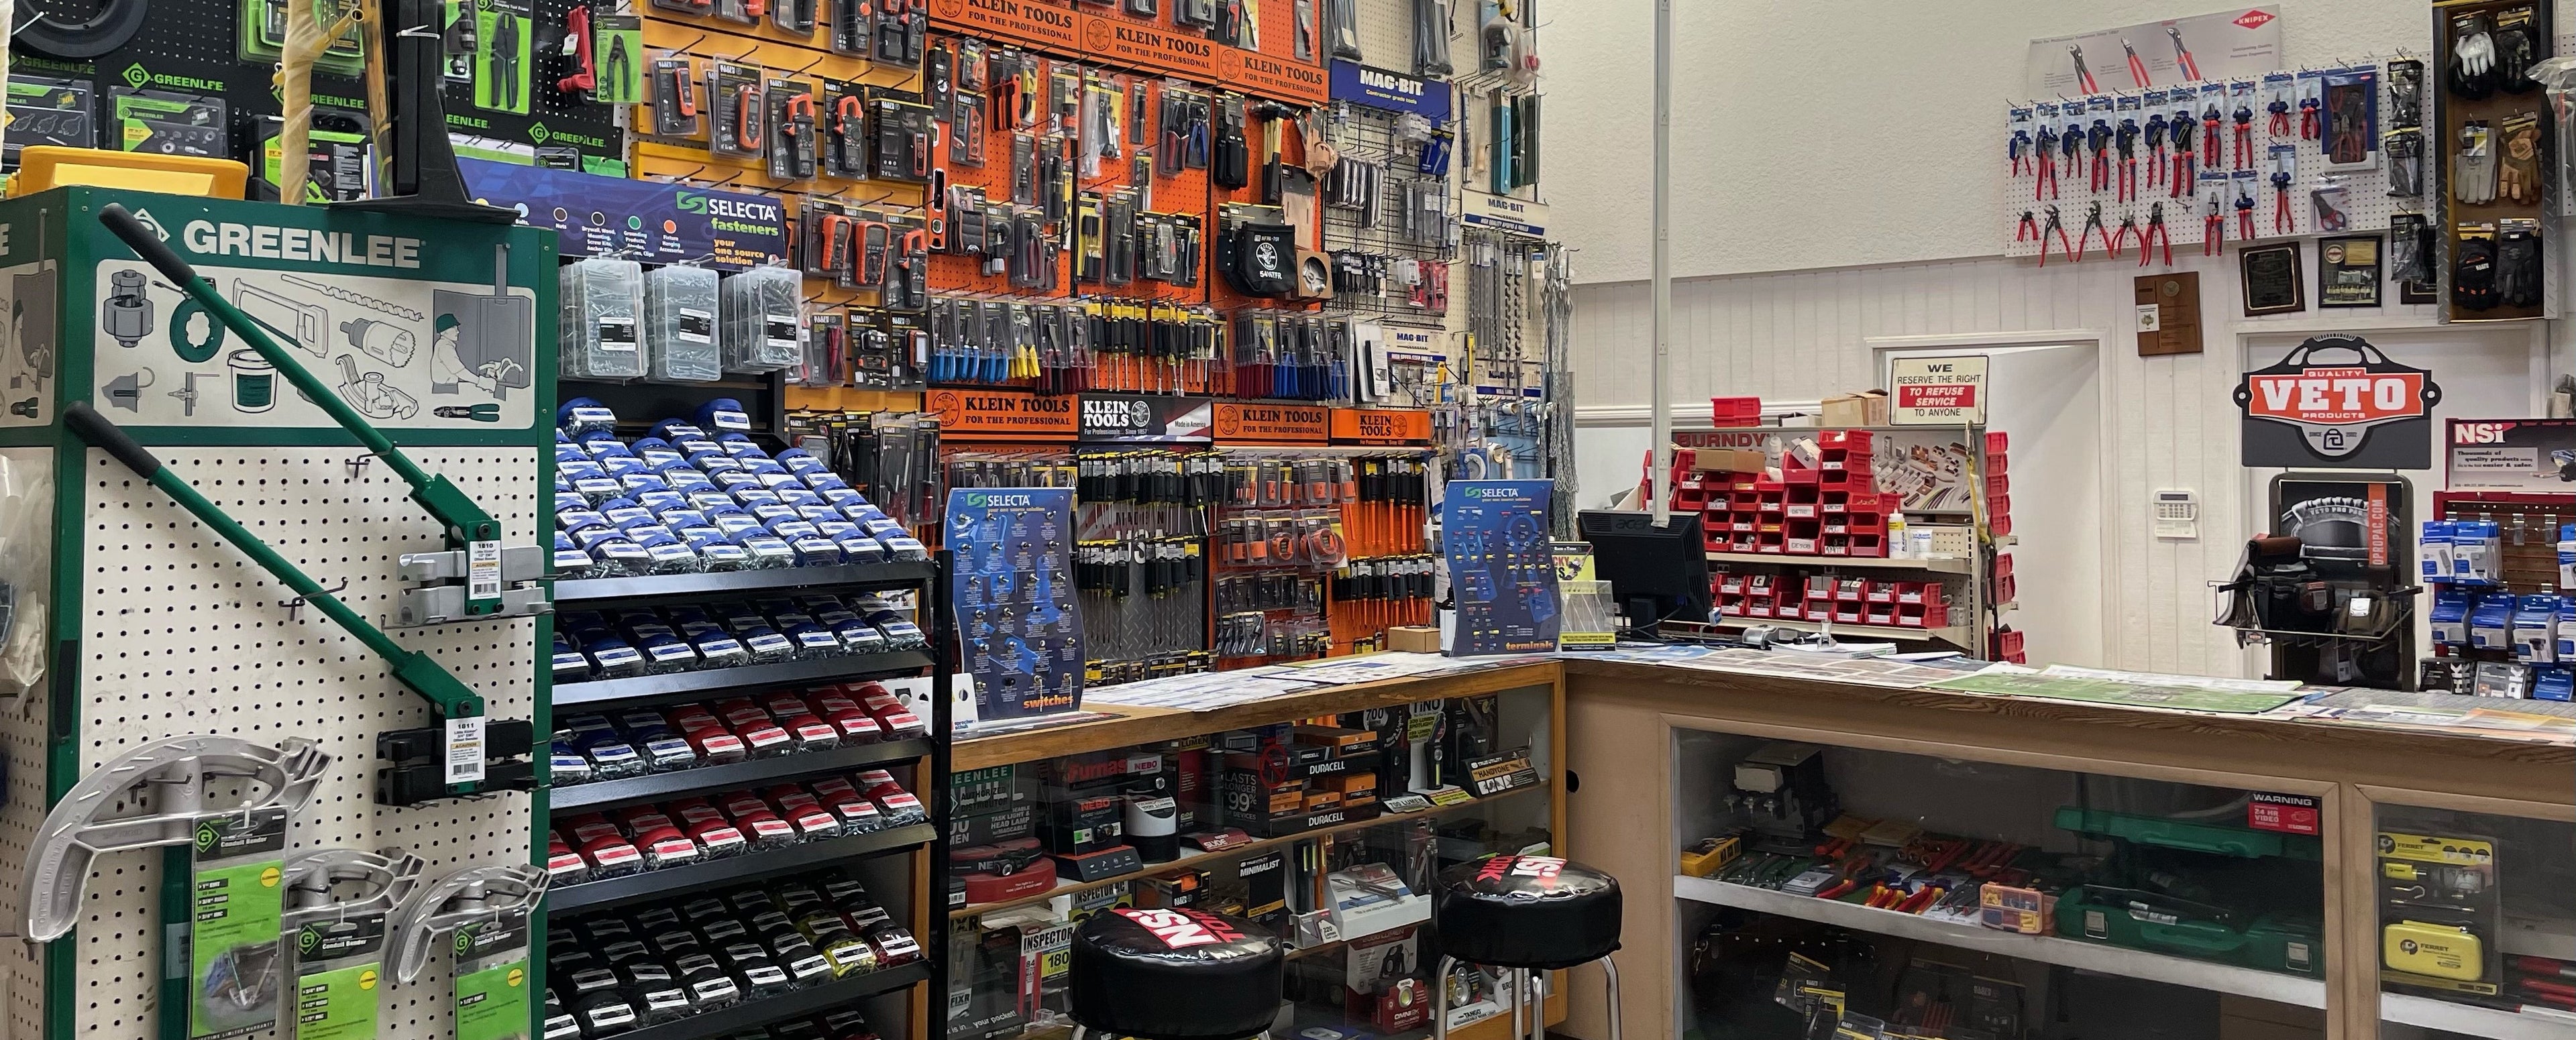 The inside of J&A Electrical Supplies